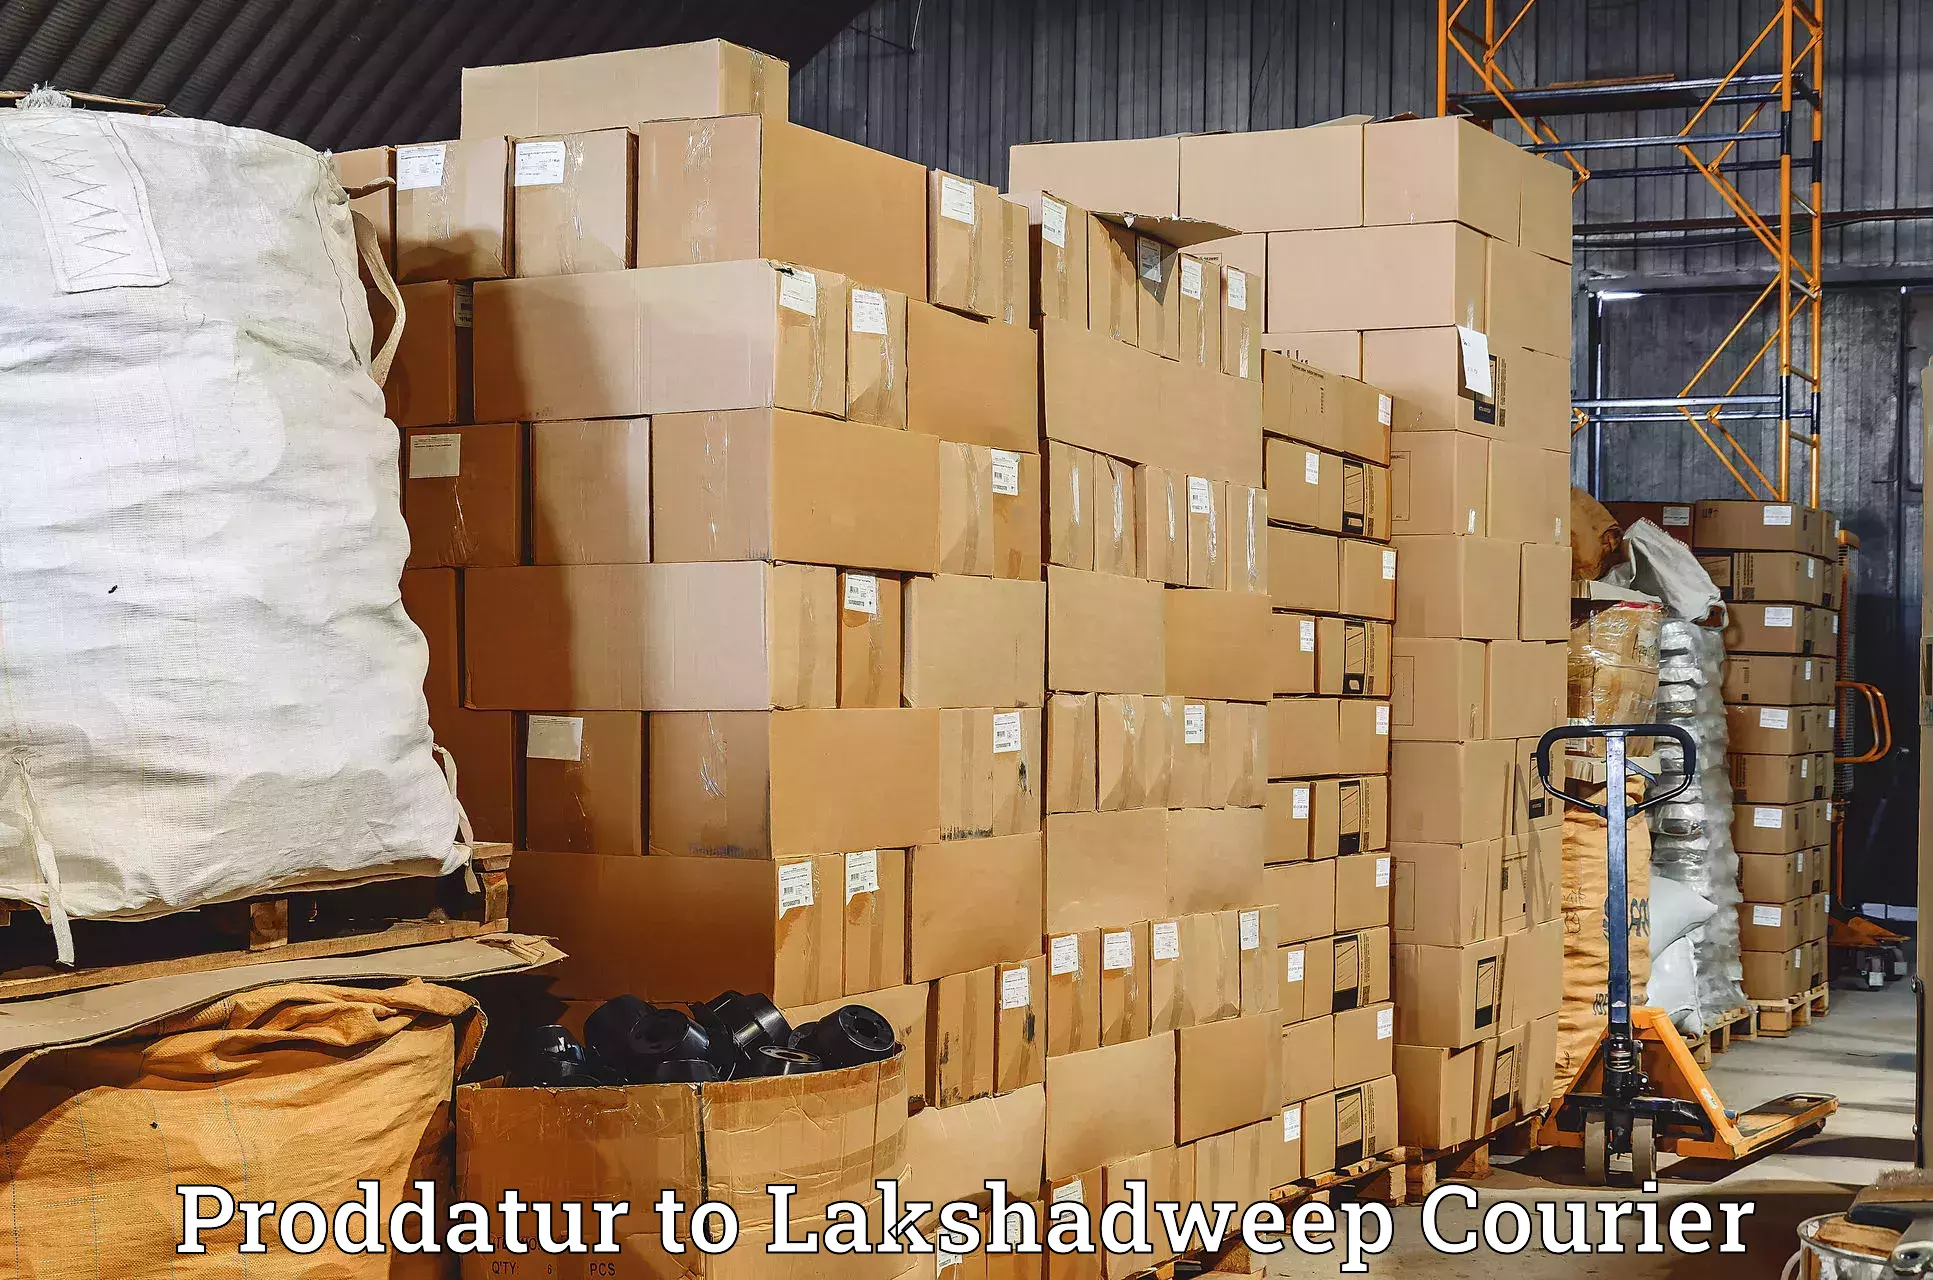 Parcel handling and care Proddatur to Lakshadweep